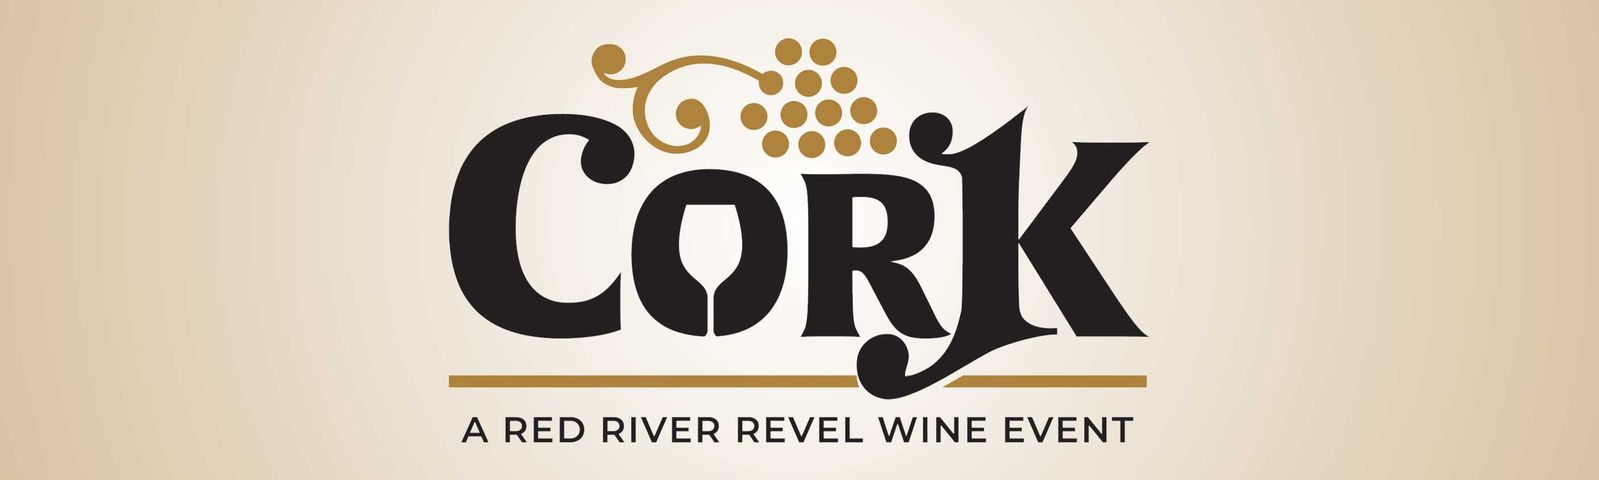 <h1 class="tribe-events-single-event-title">CORK- A Red River Revel Wine Event</h1>